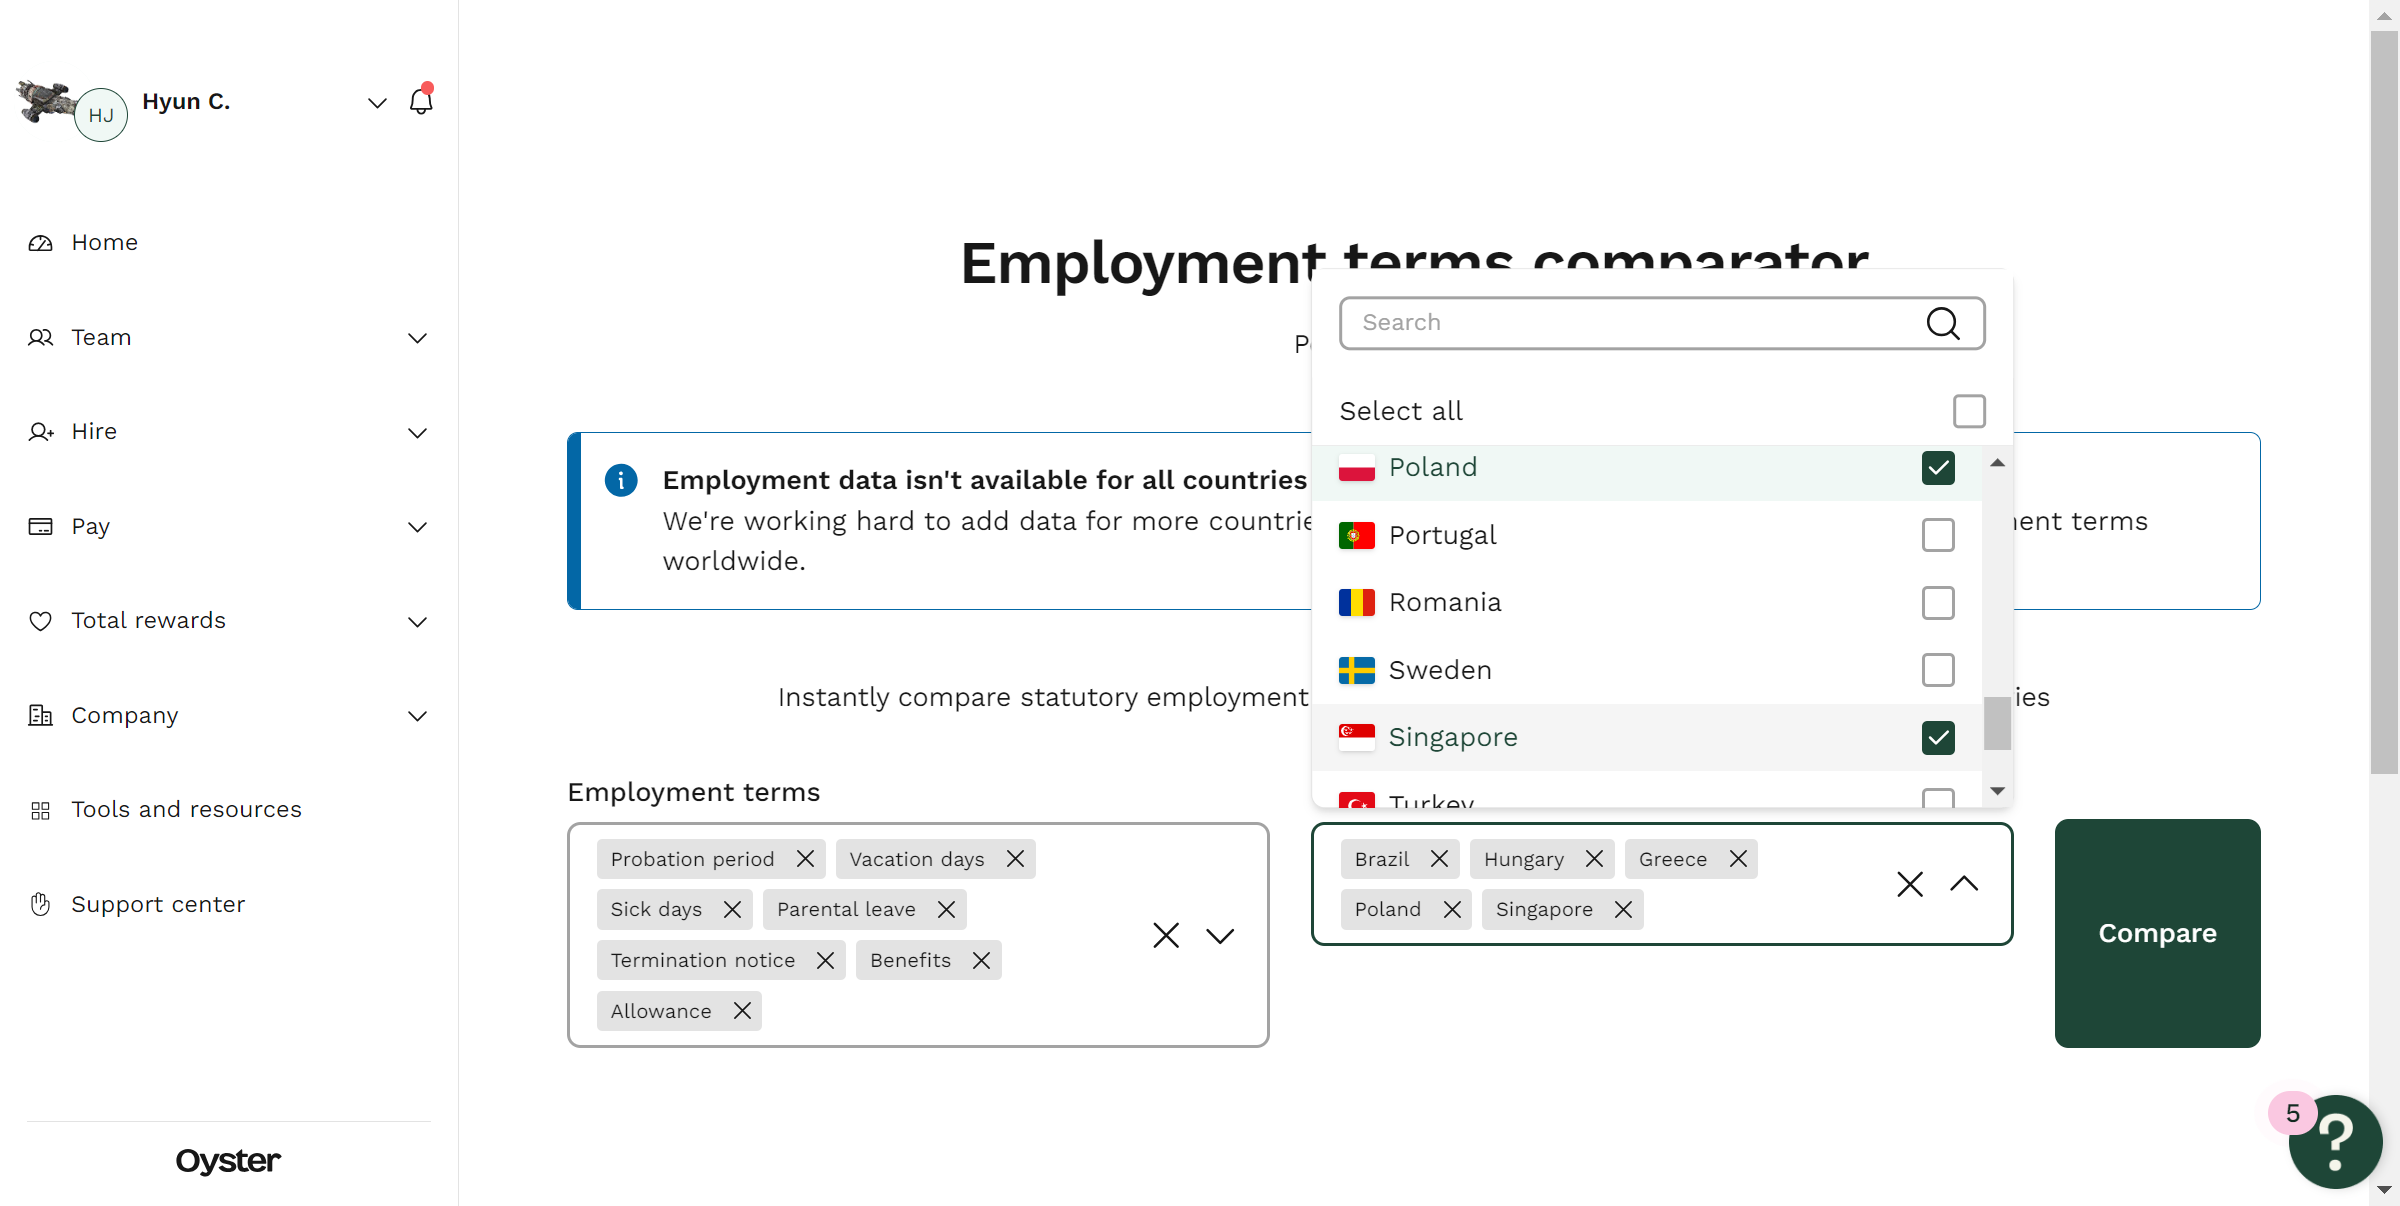 Choose the specific employment terms you need and compare multiple countries simultaneously. It's a practical way to evaluate your options.

Step 2 of 3